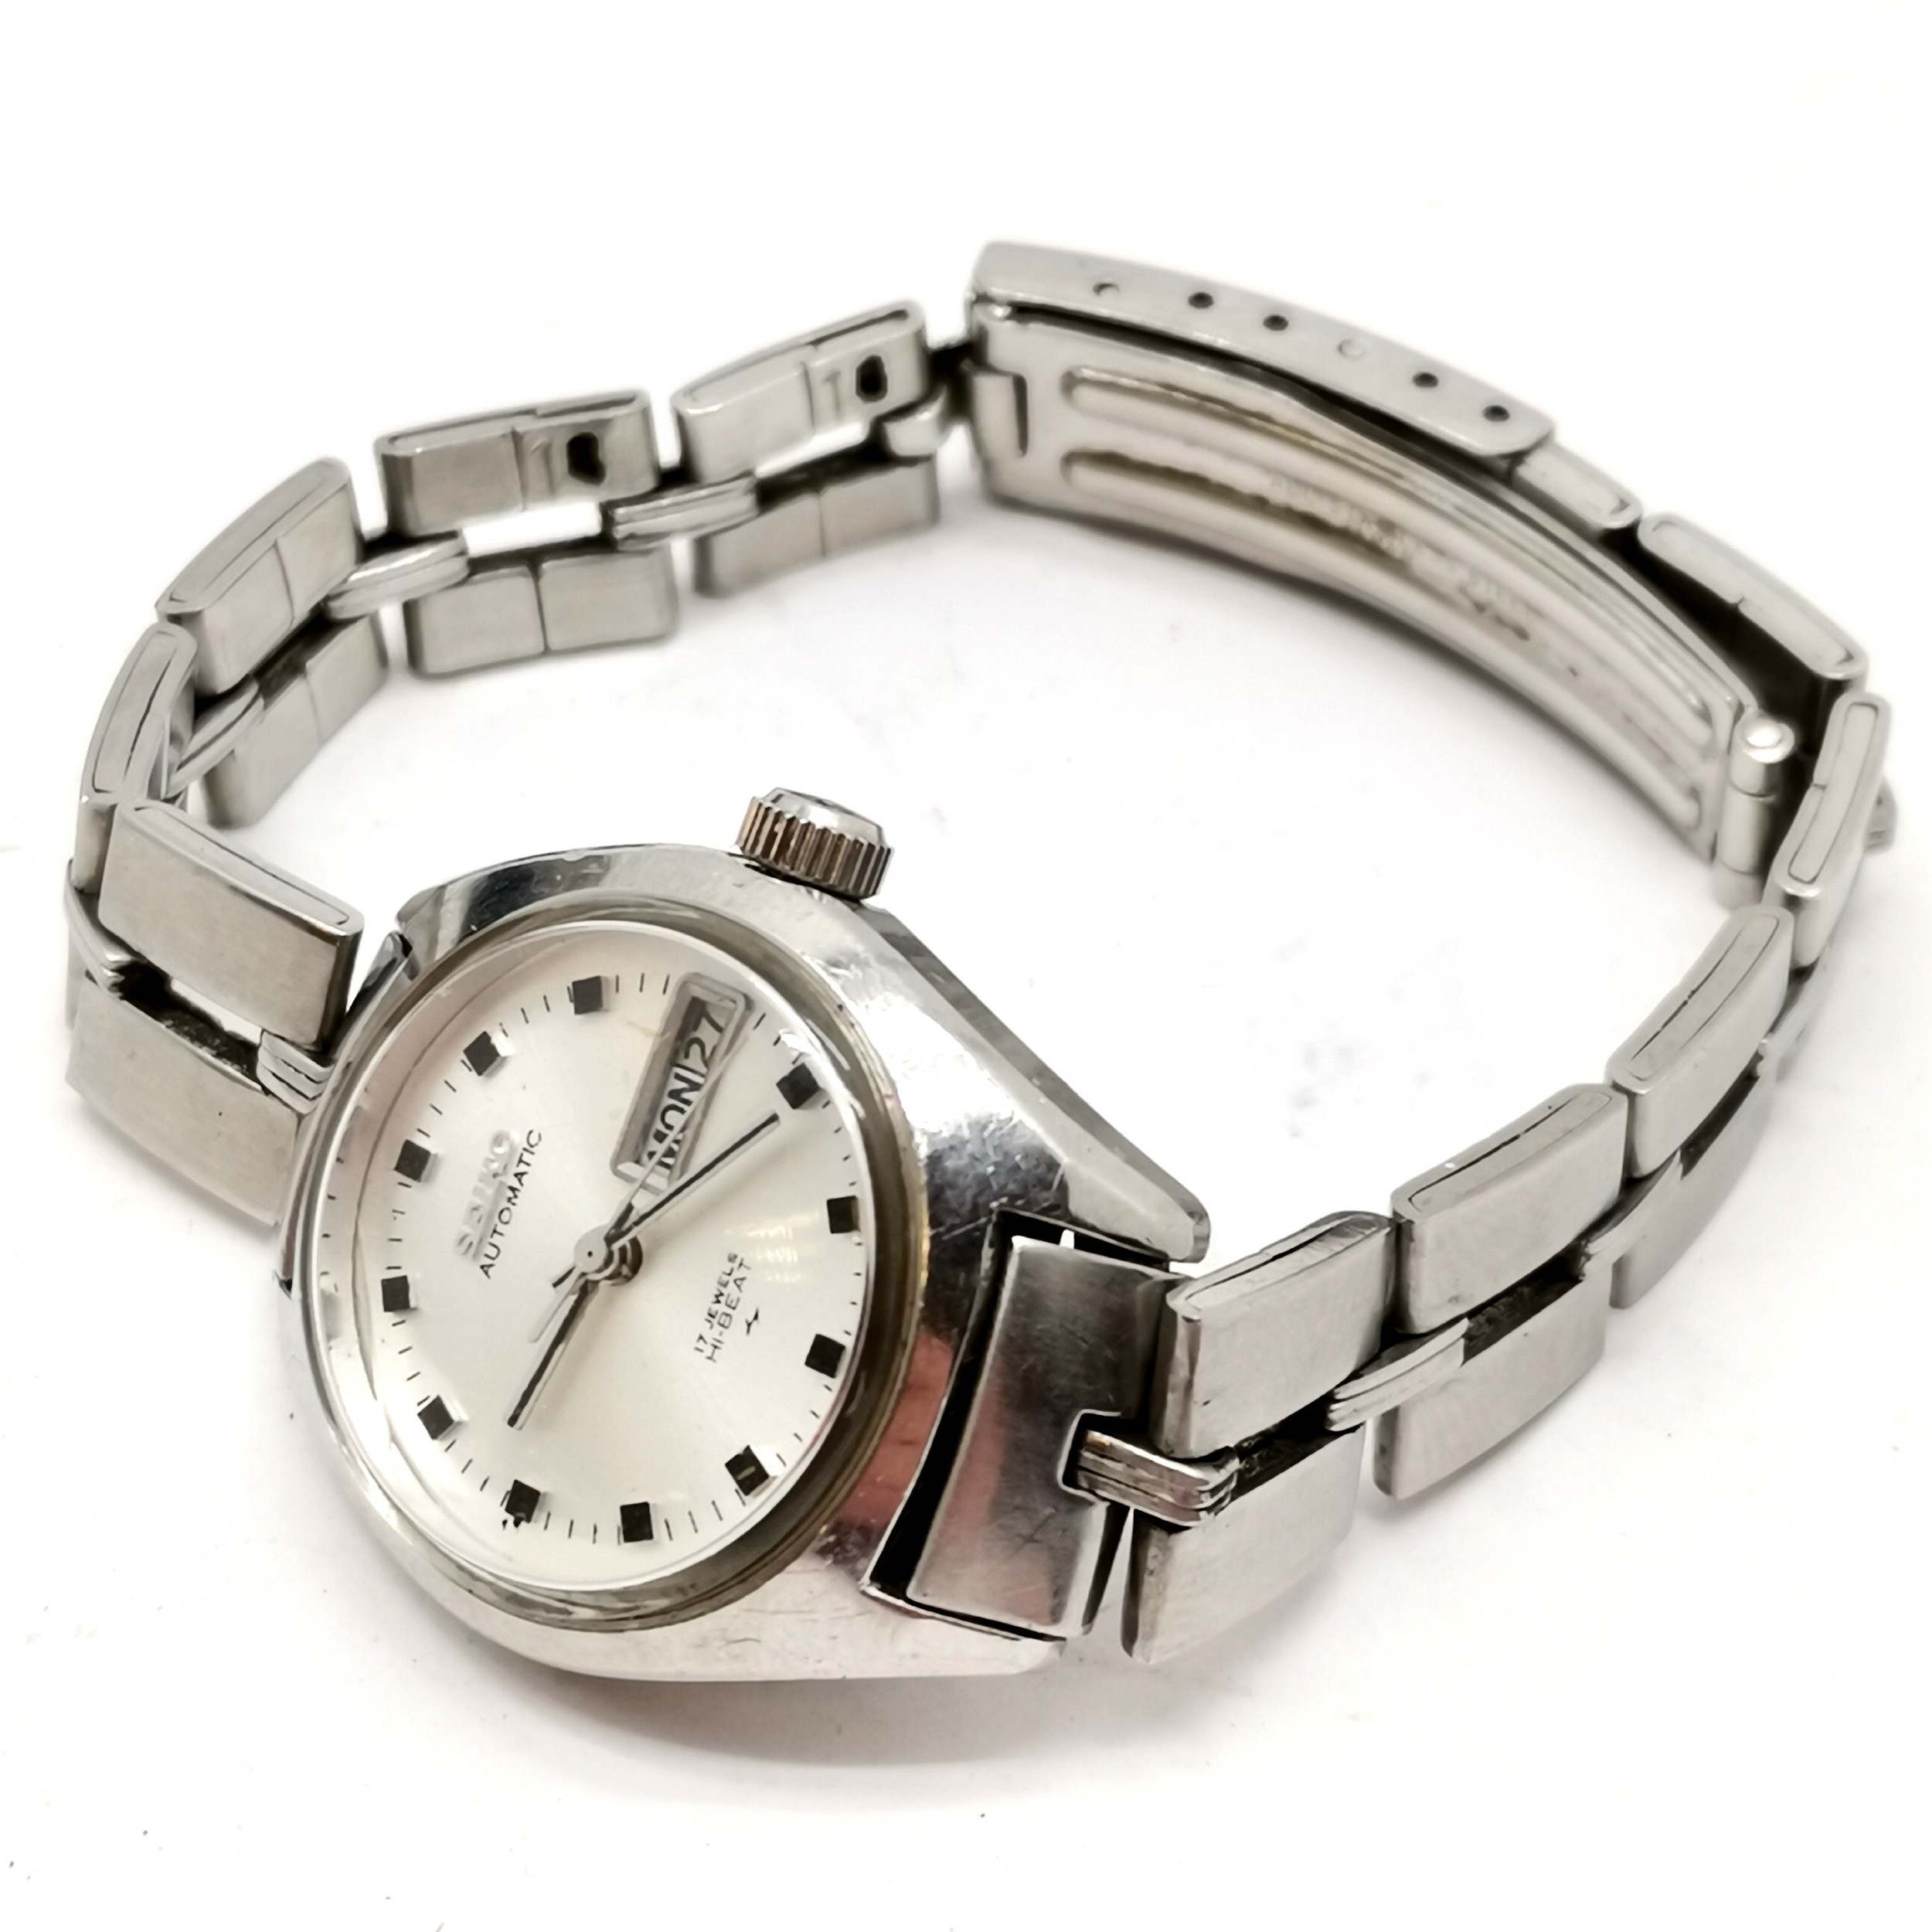 Seiko automatic ladies vintage high-beat wristwatch with day / date aperture (22mm case) in an - Image 3 of 5